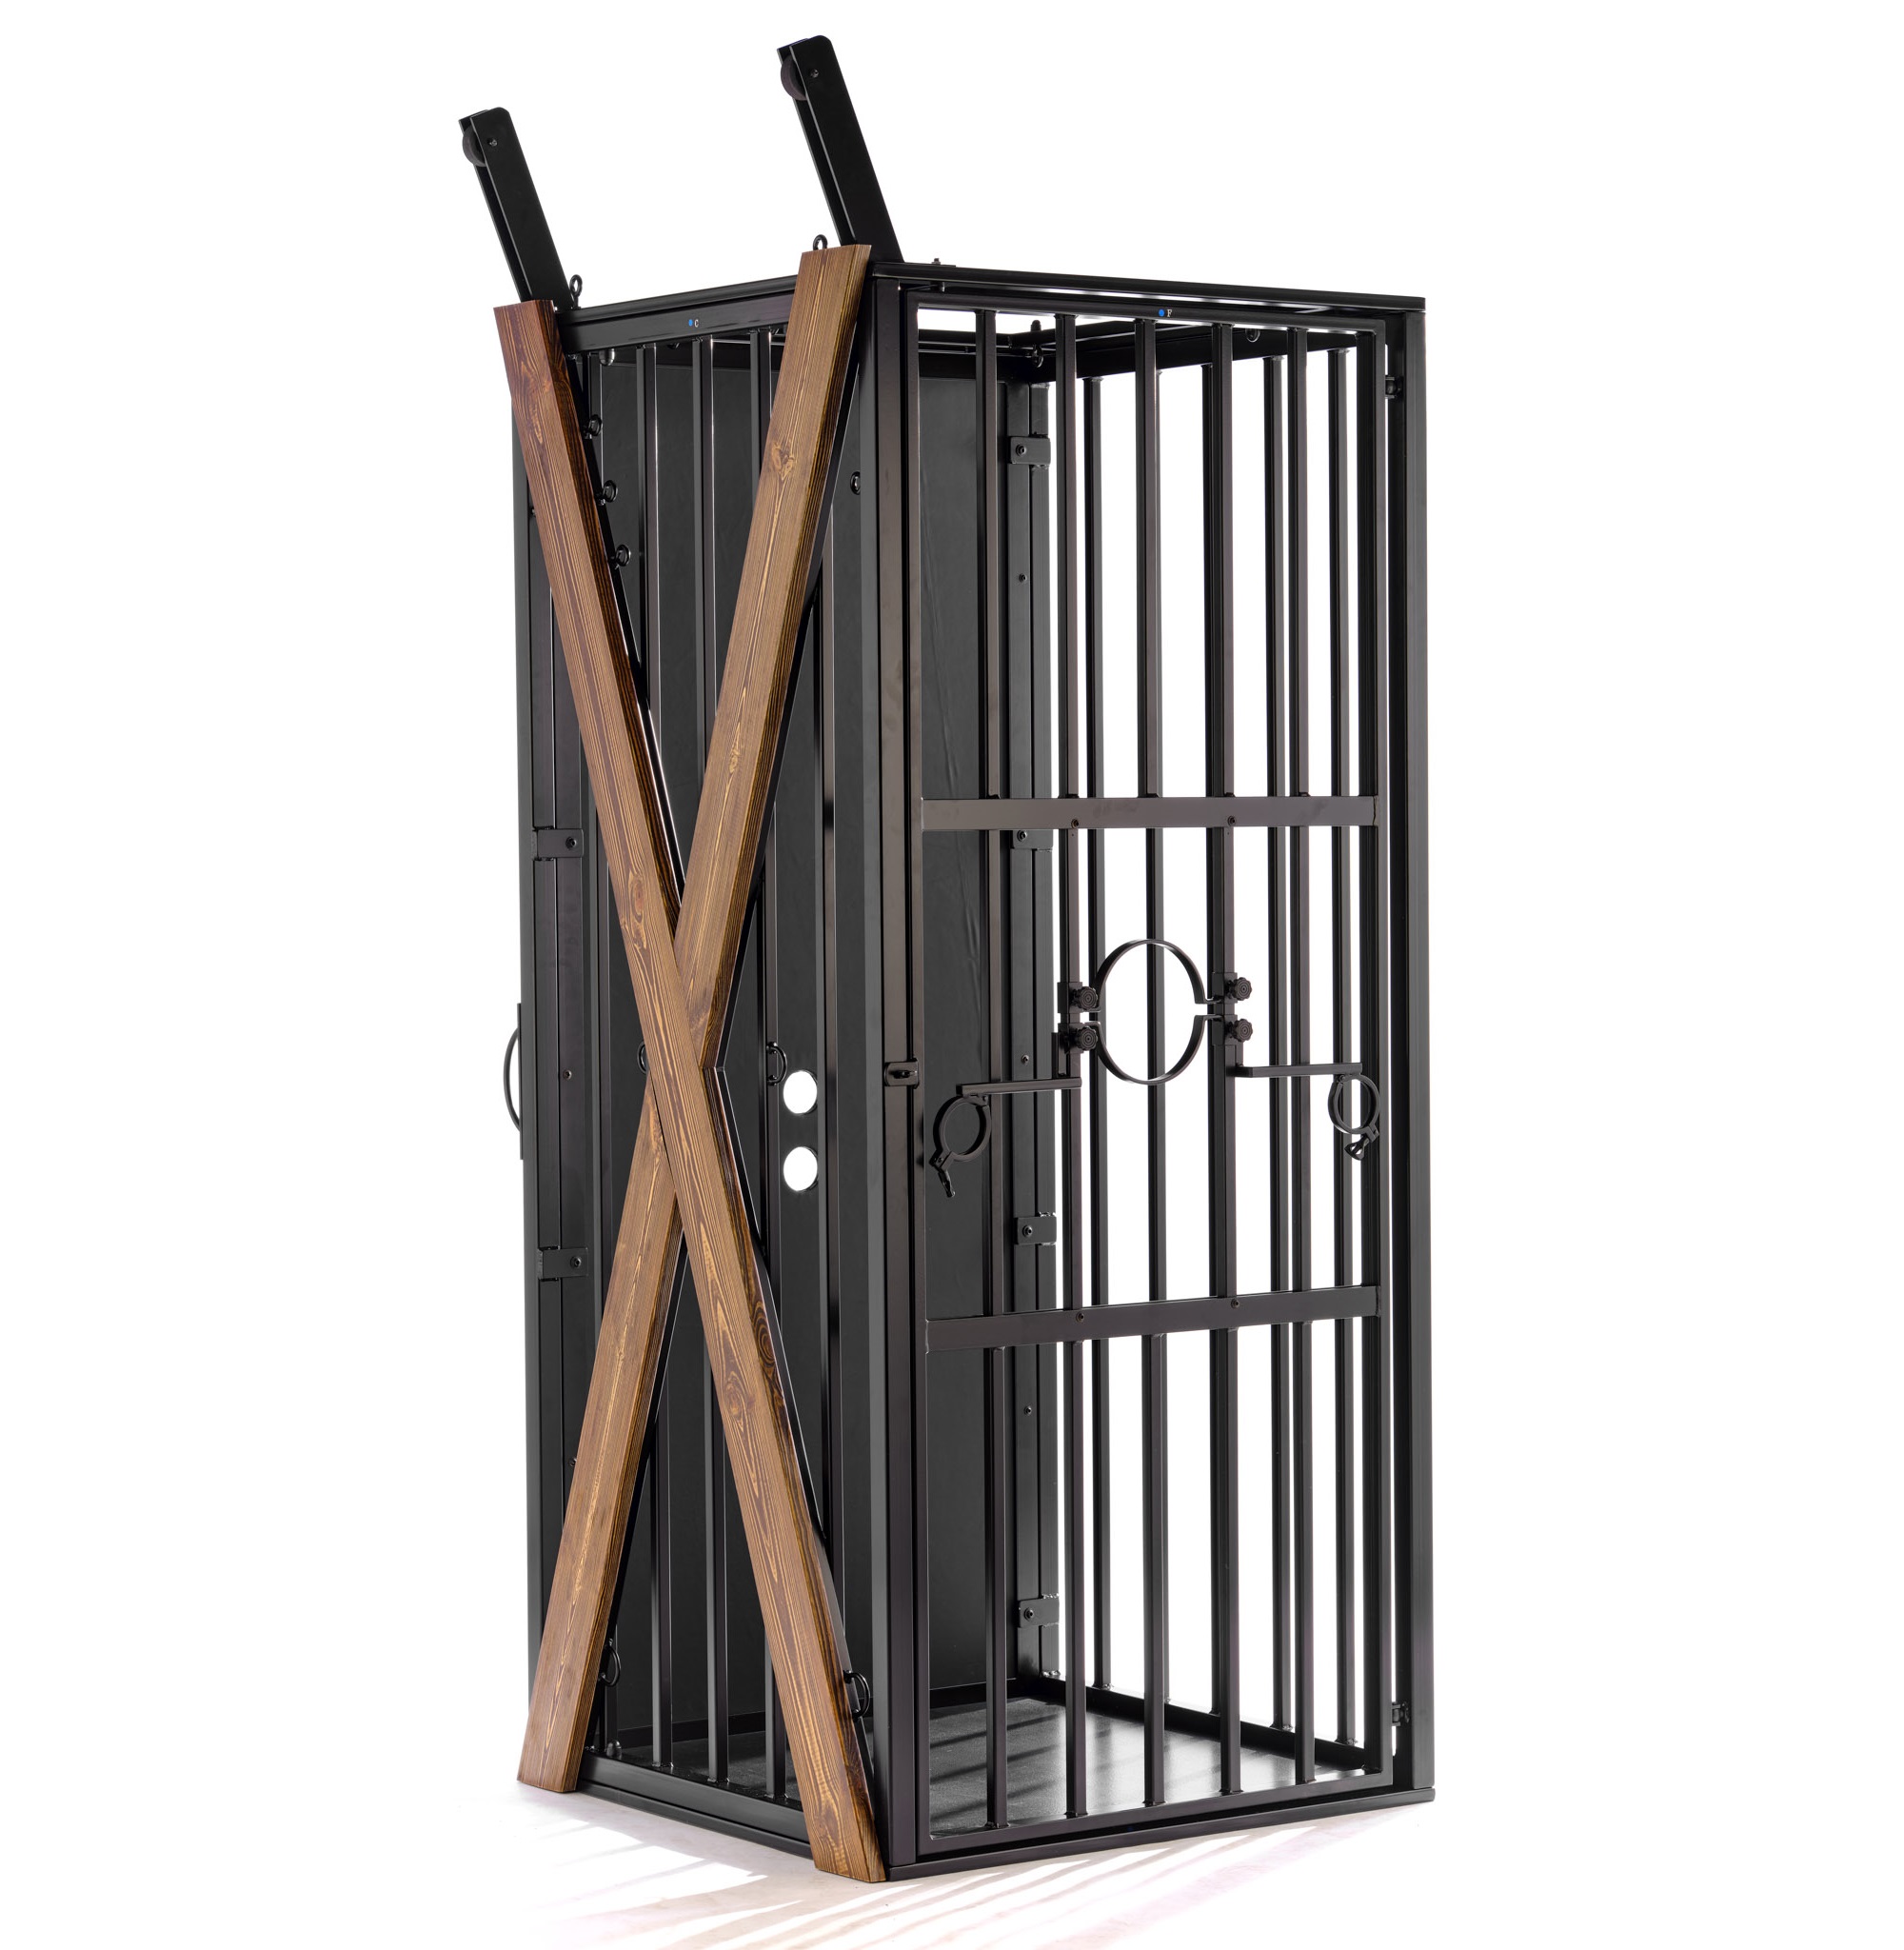 Black Powdercoated Steel Upright Stand Up Slave Cage with Glory Hole and St. Andrew's cross Luxxx.eu